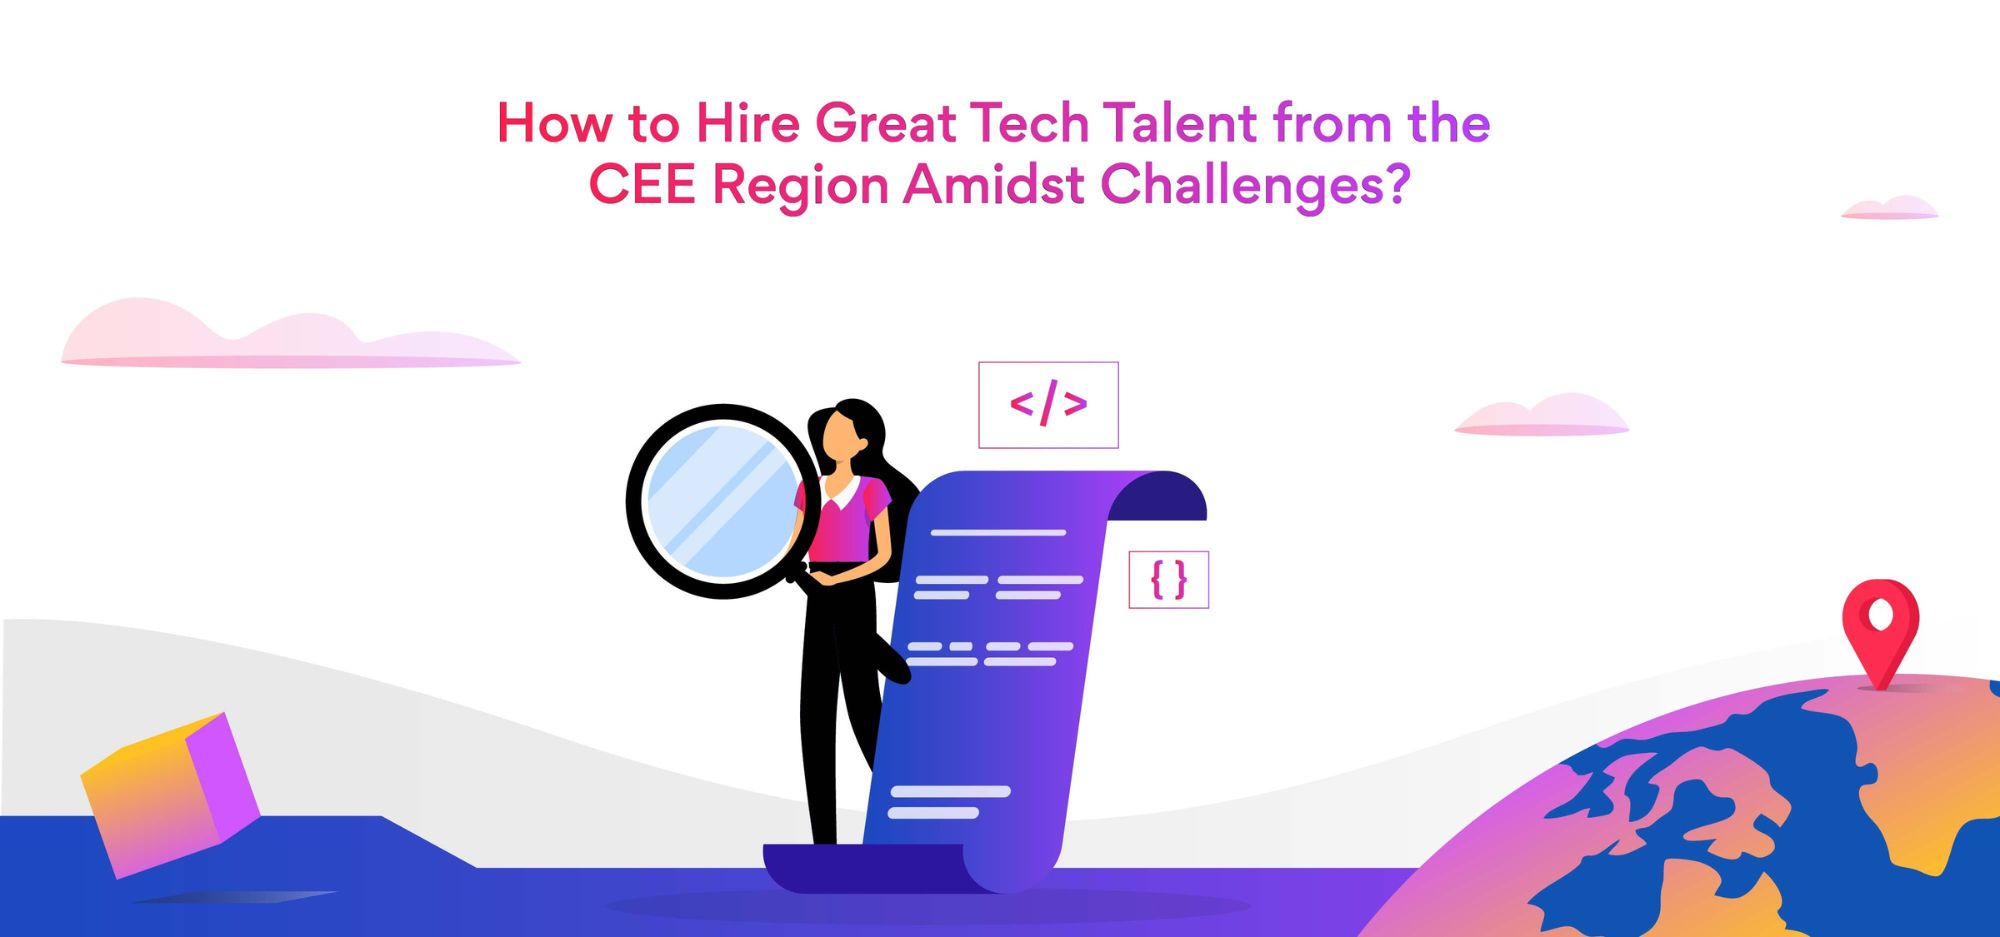 Hire great tech talent from CEE region amidst challenges